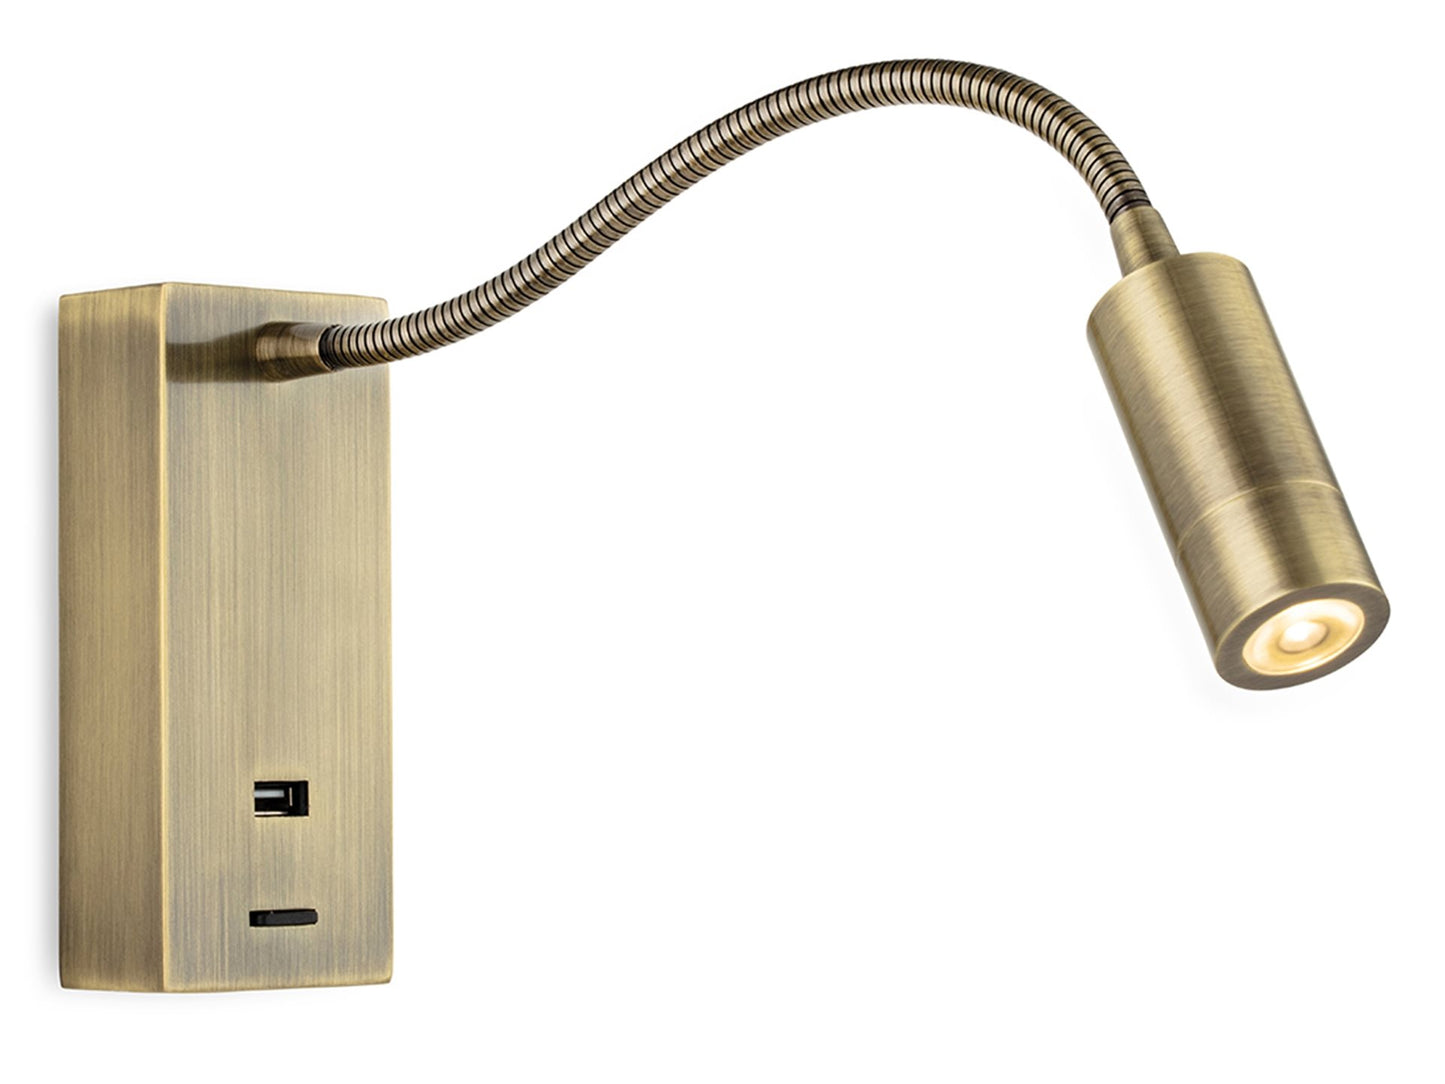 Clifton LED Flexi Wall Light with USB PortAntique Brass